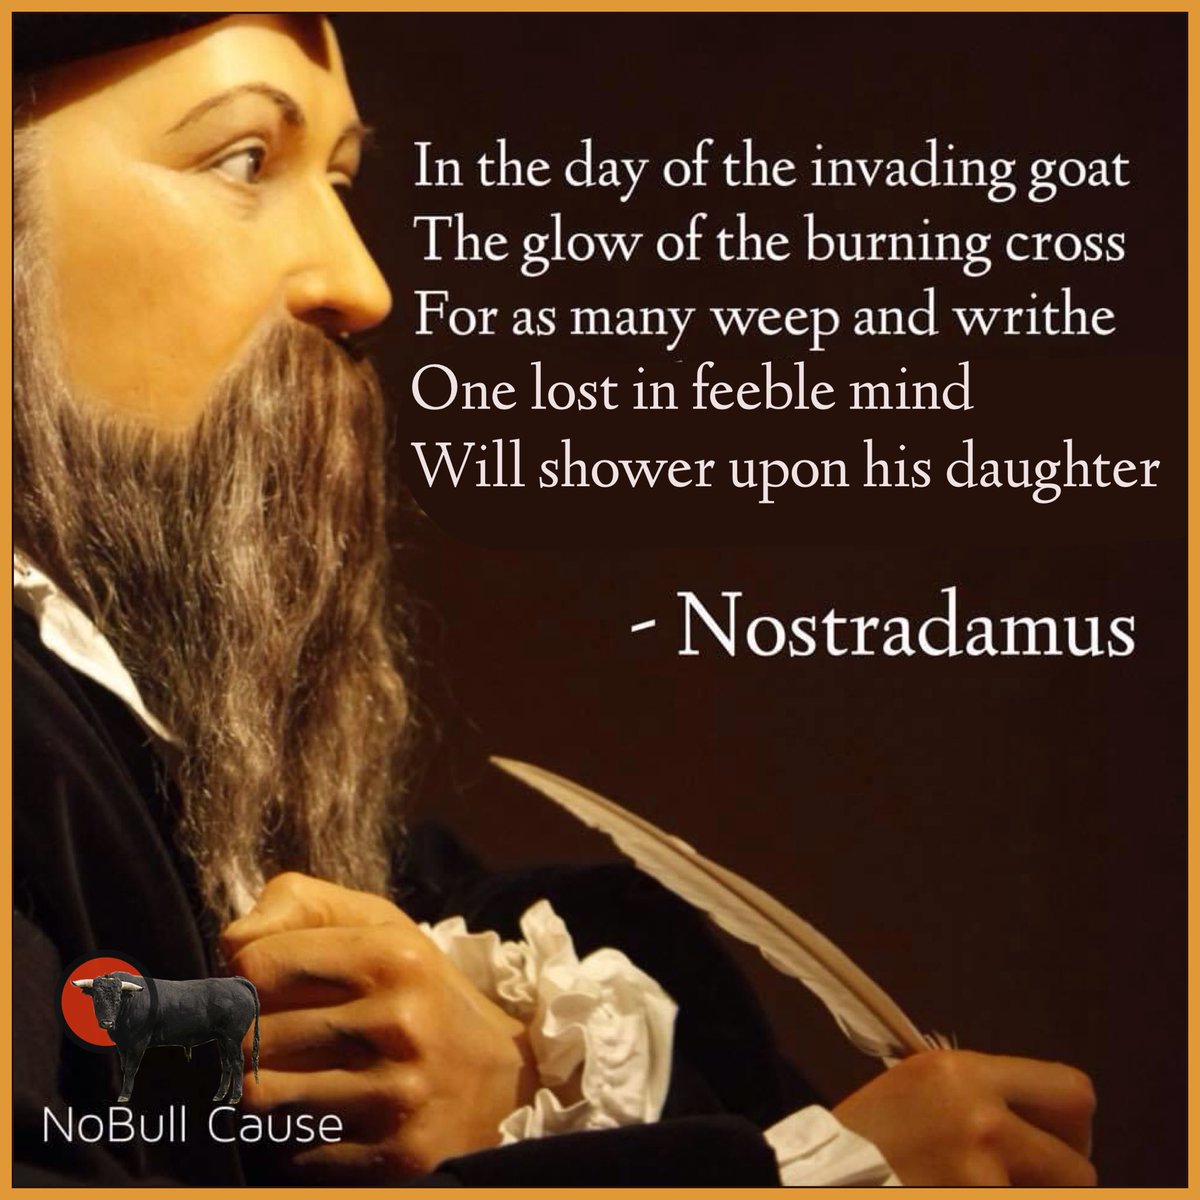 I had a vision of a lost book of Nostradamus. I wonder if this quatrain means something.